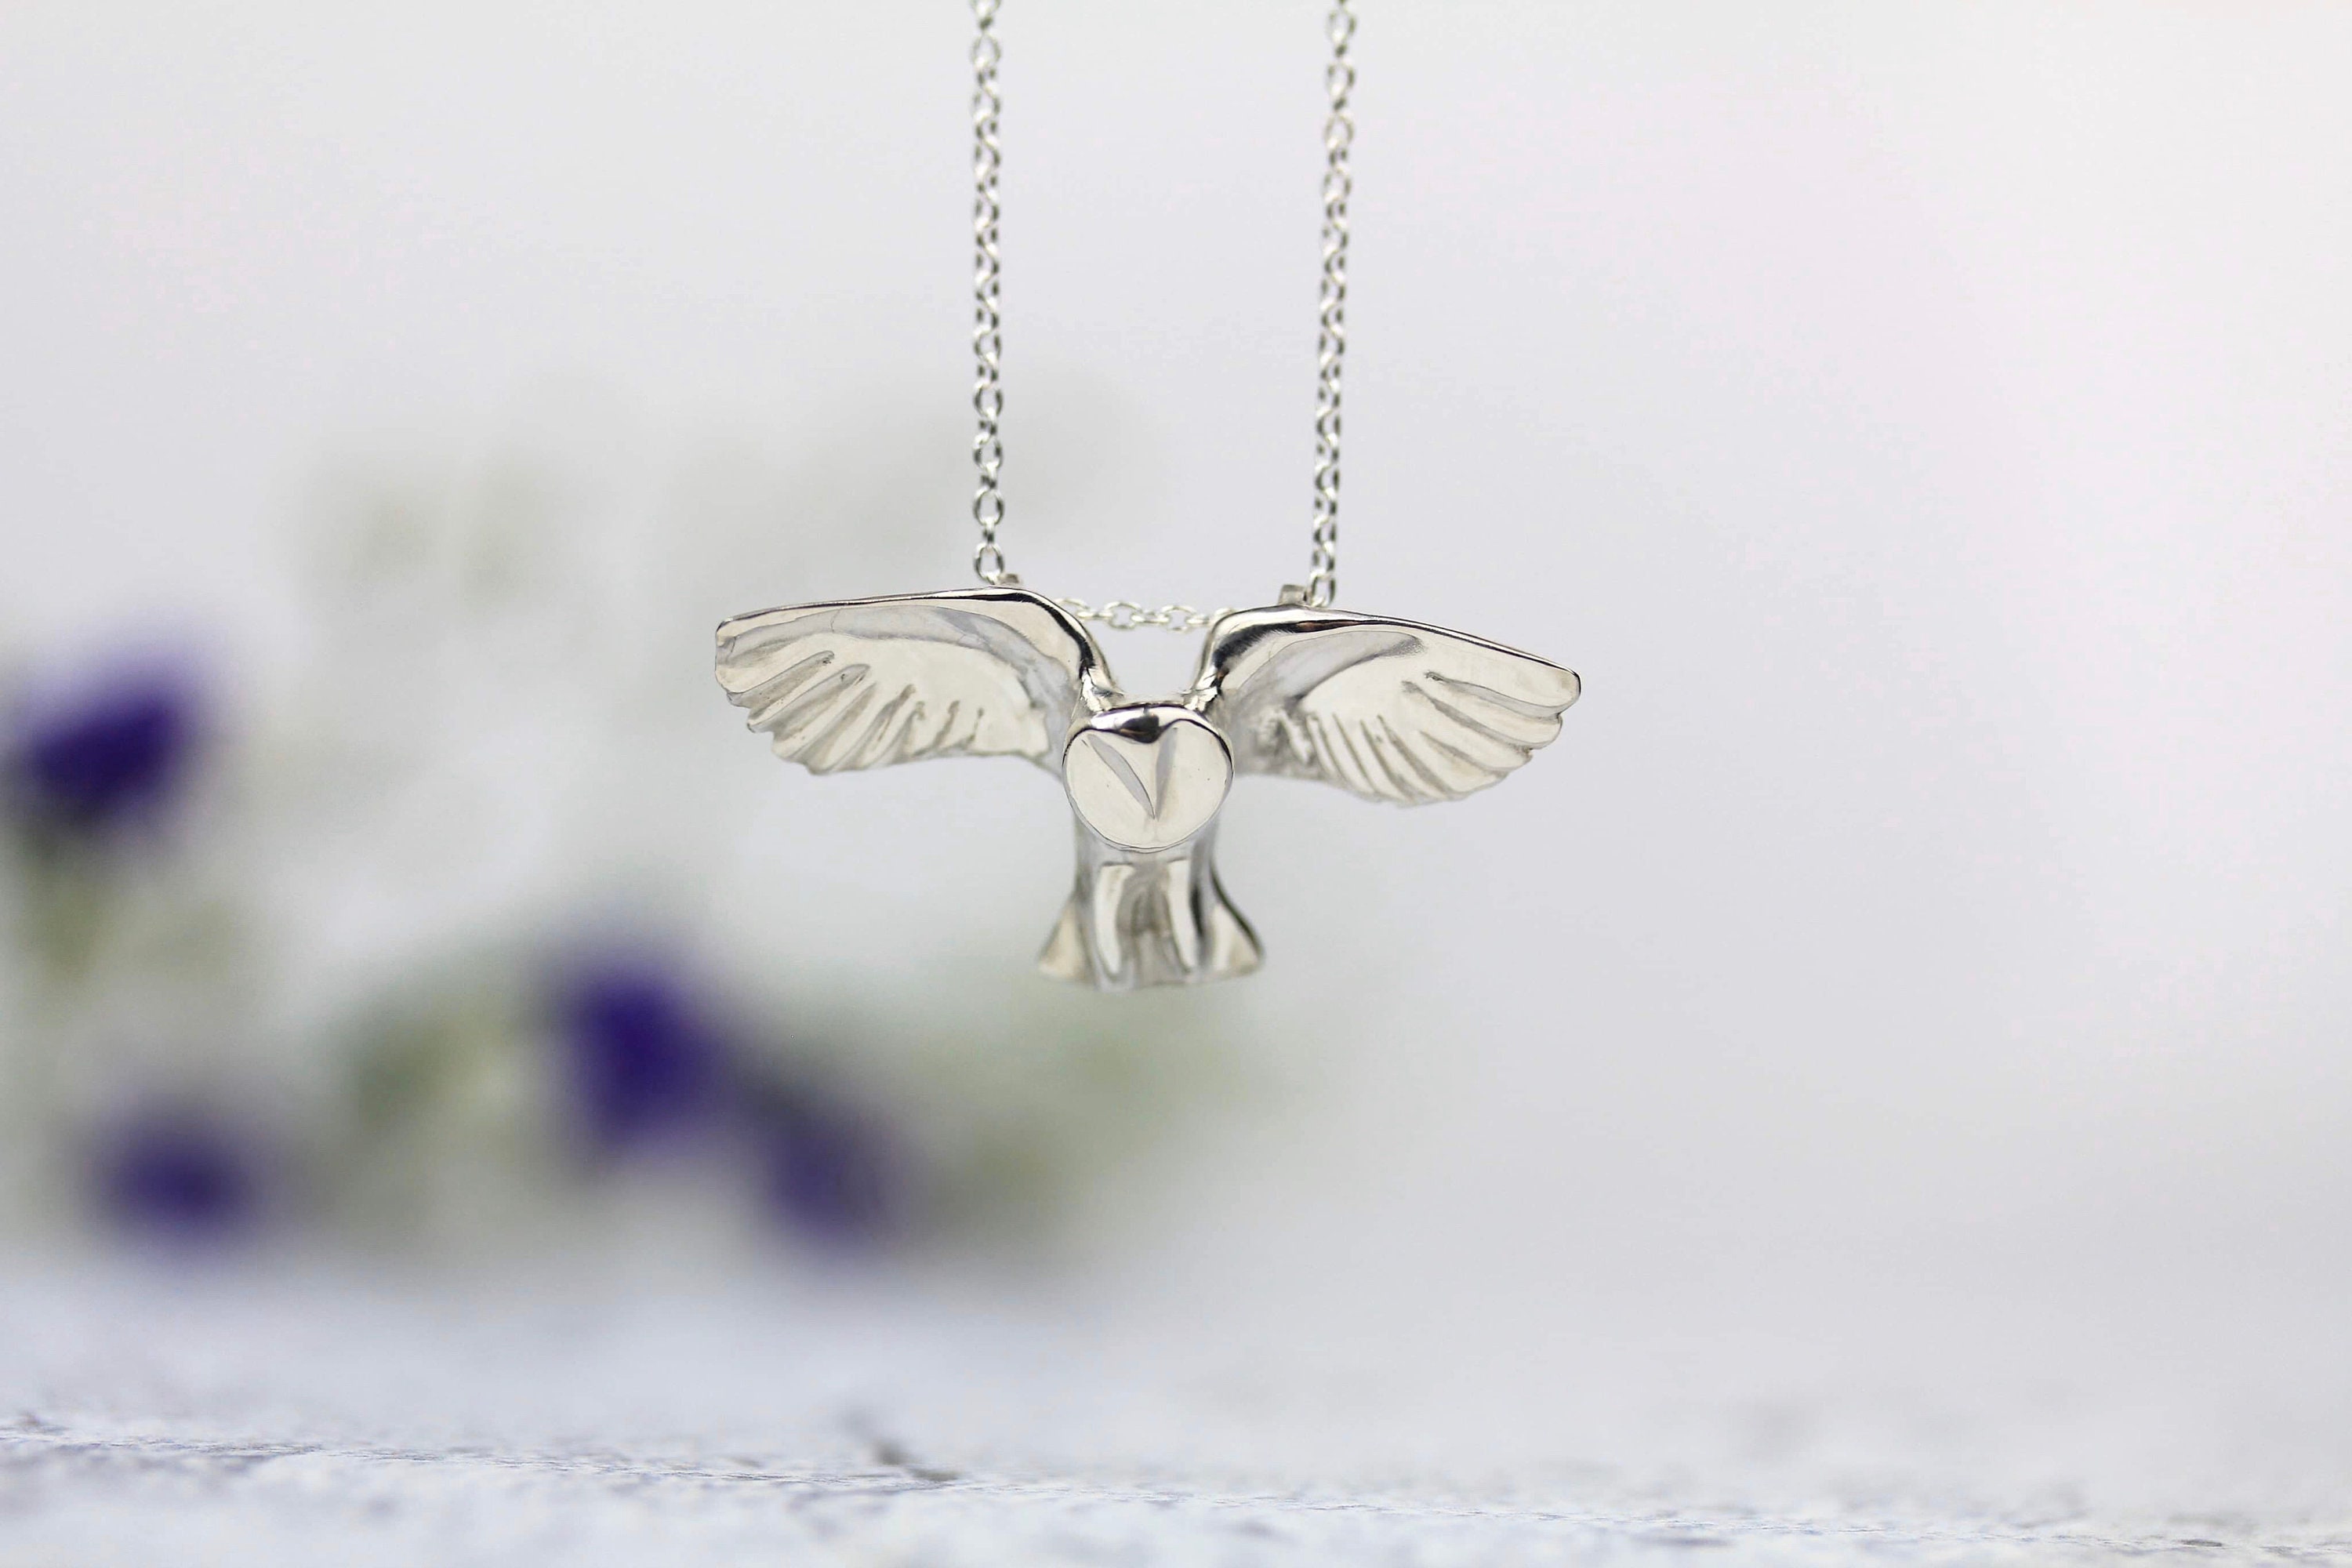 Barn Owl Necklace | Flying Pendant Hand Carved Nature Inspired Jewellery - Animal & Bird. By Rosalind Elunyd Usa